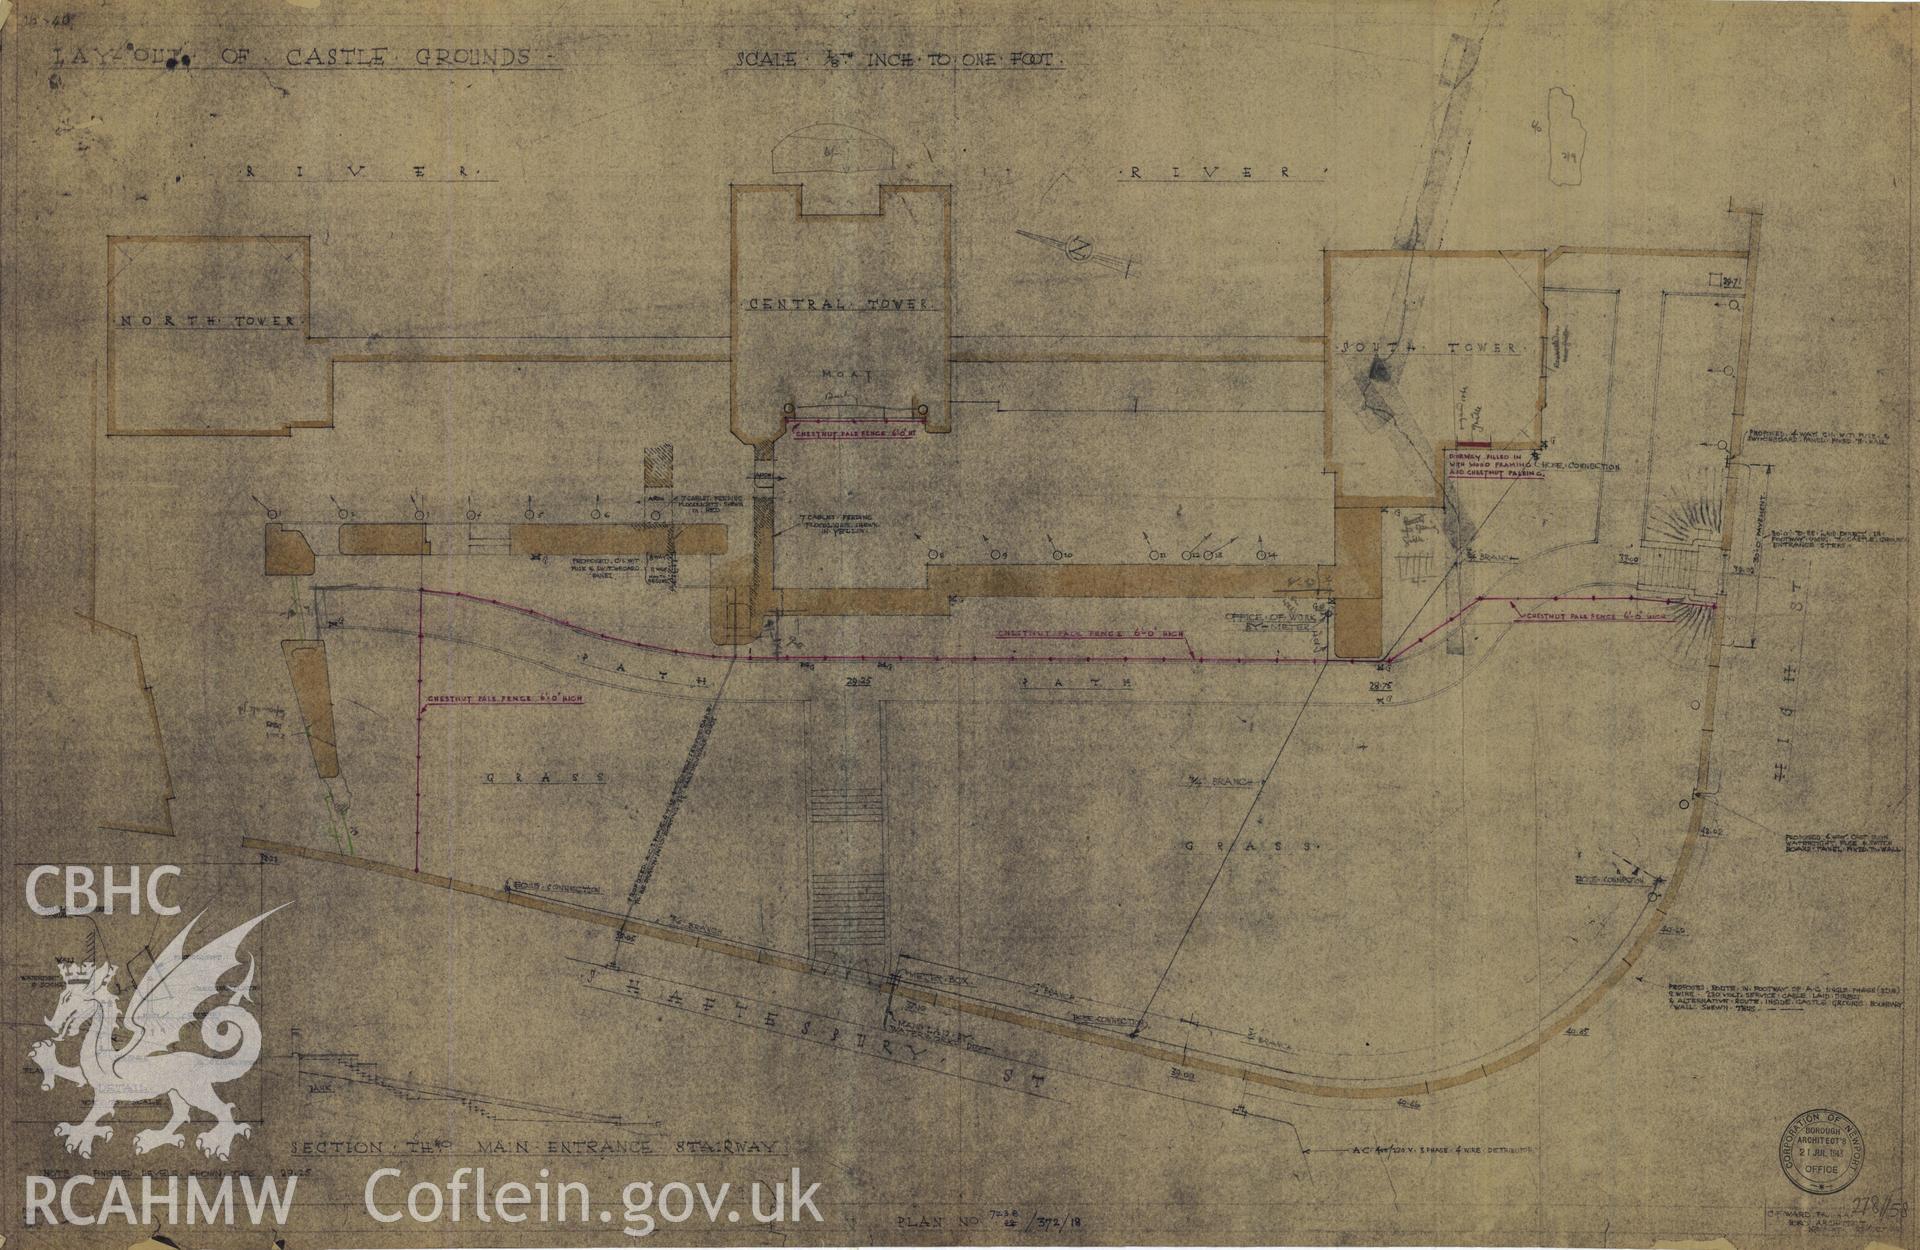 Cadw guardianship monument drawing of Newport Castle. General plan of park etc, fencing. Cadw Ref. No:278//58. Scale 1:96.